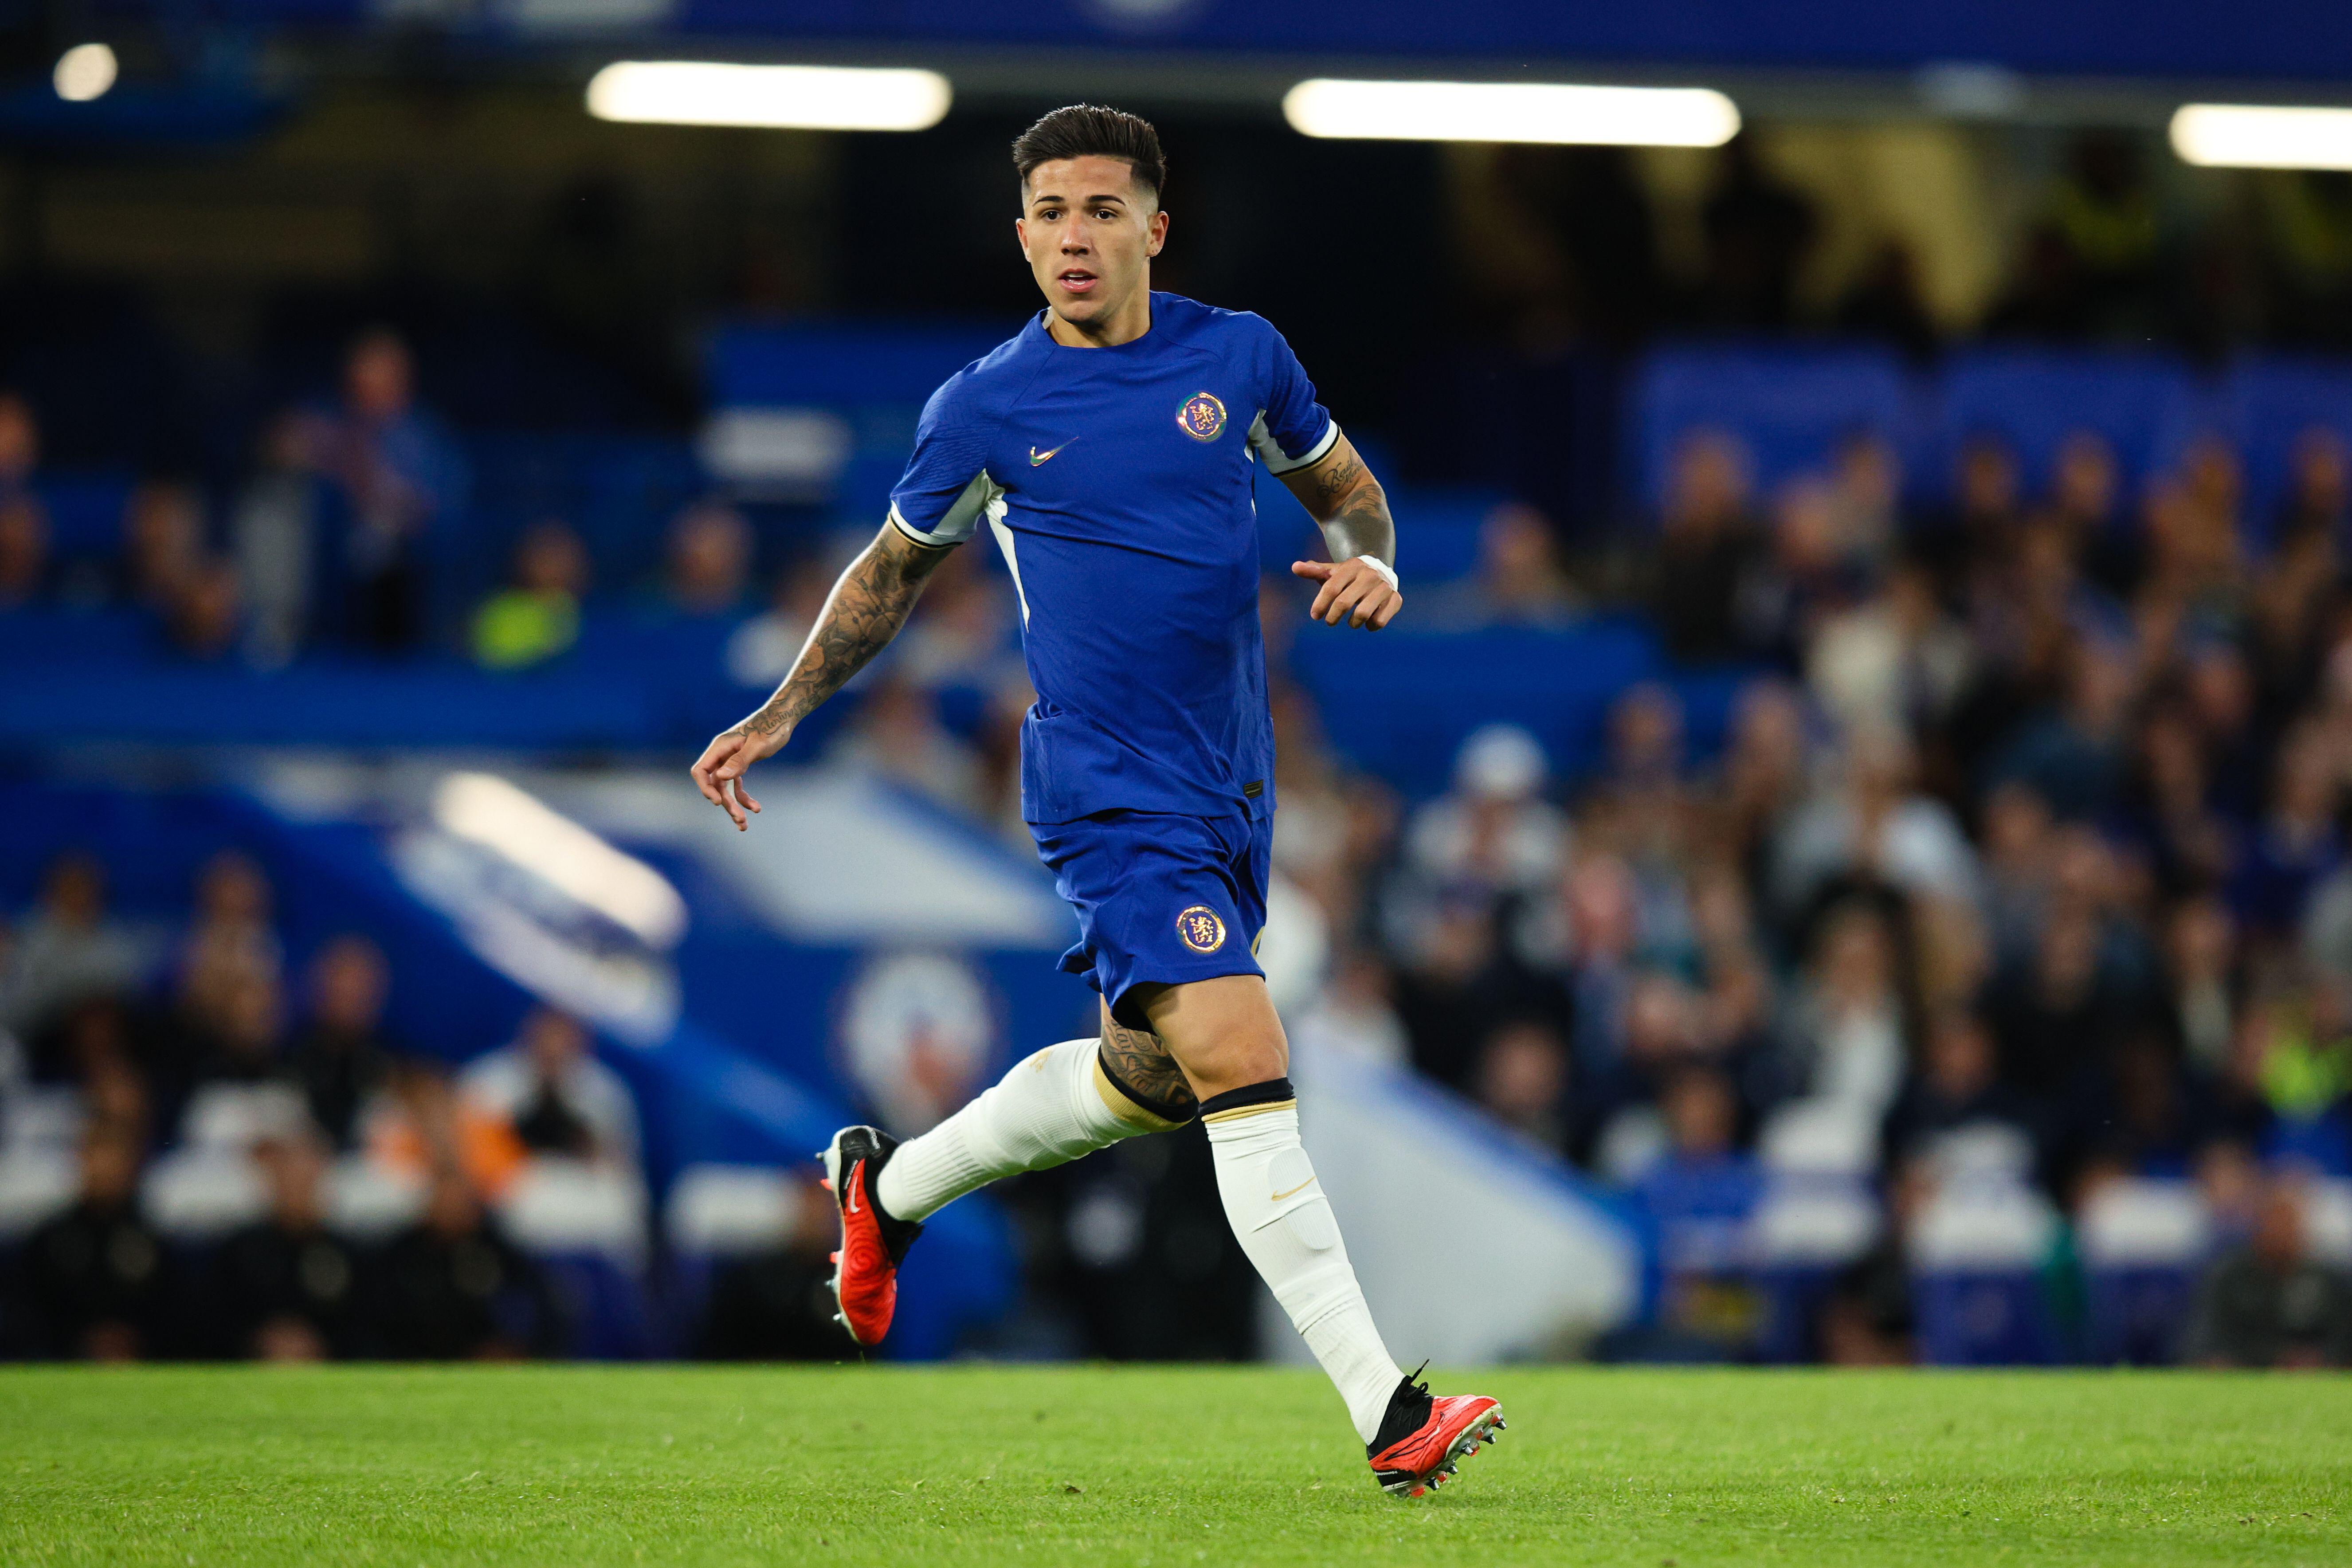 Chelsea team news and predicted XI vs Bournemouth